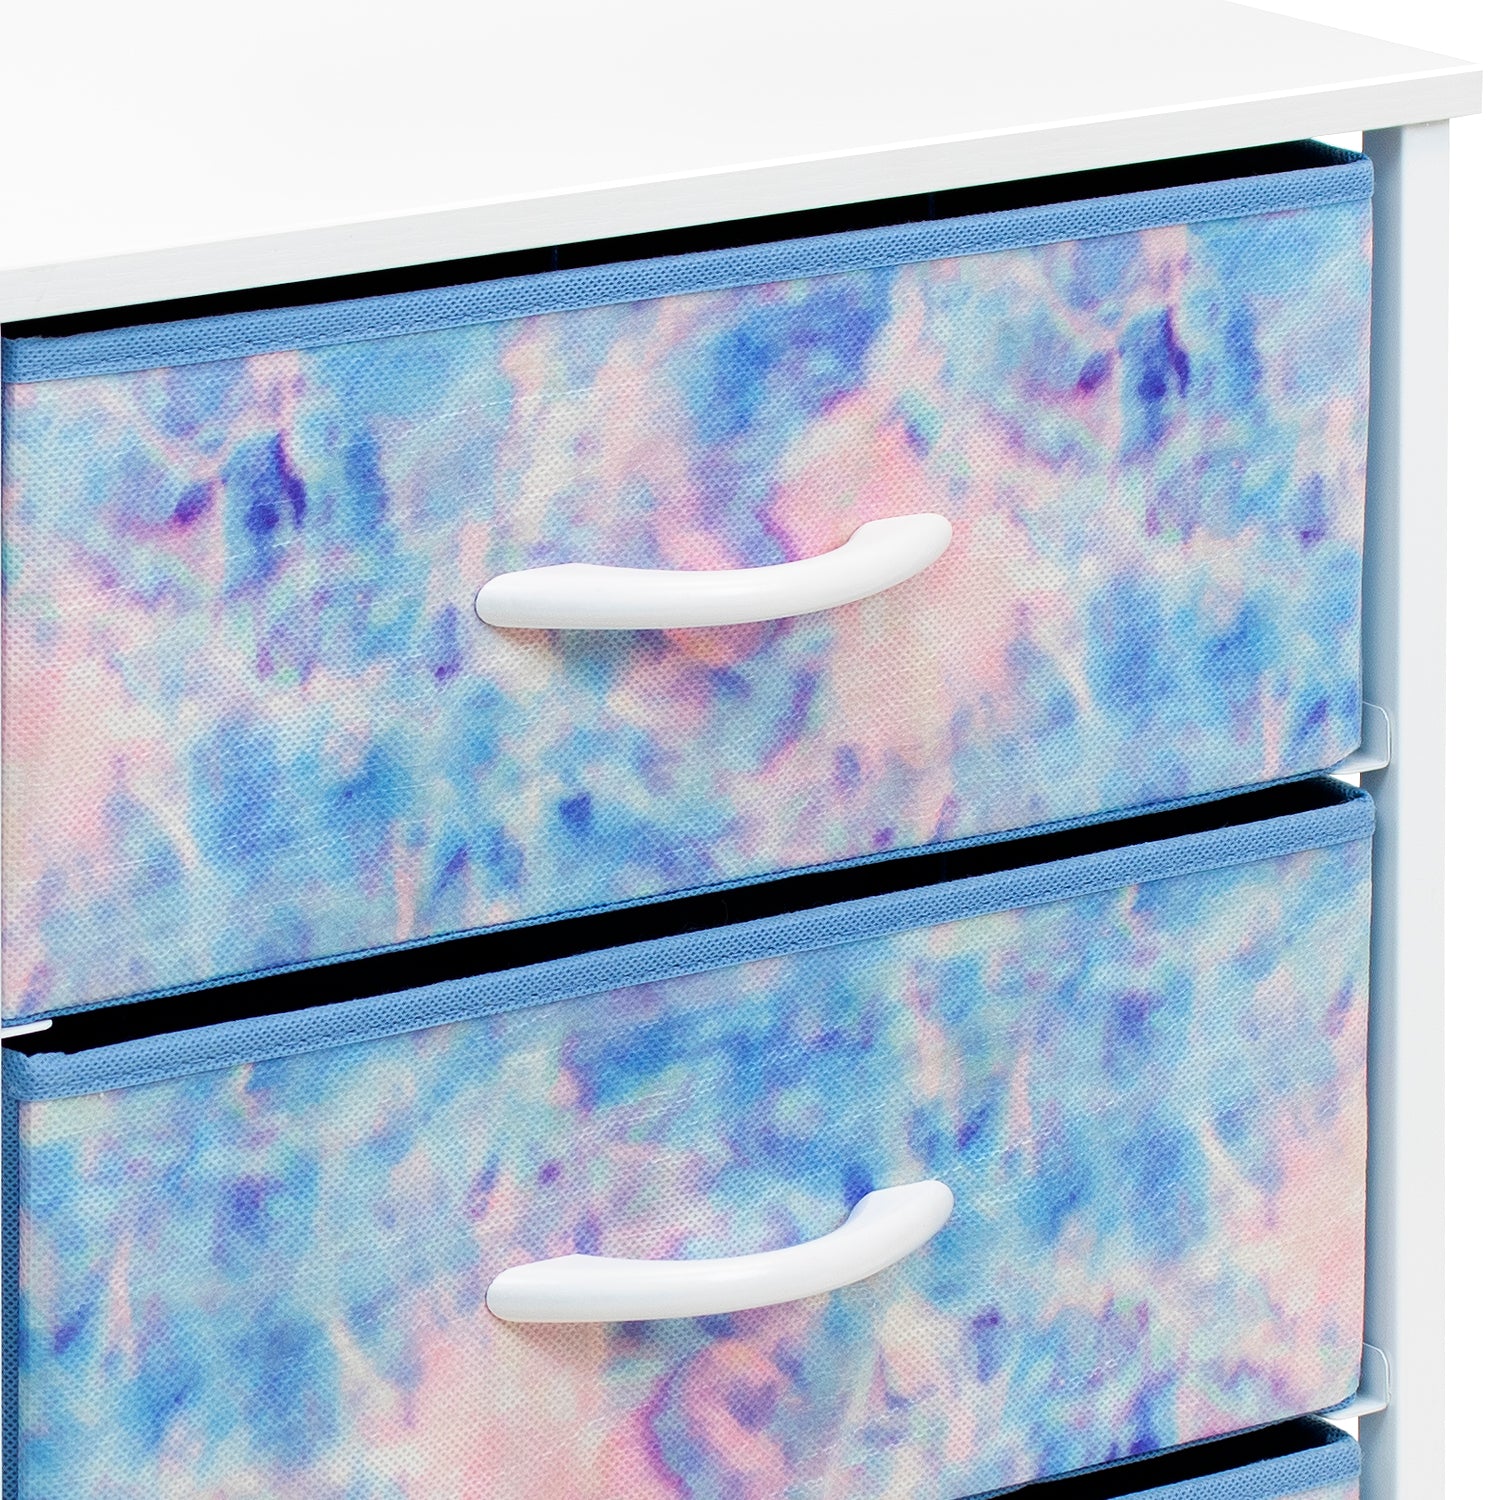 3-Drawer Chest Nightstand (Tie-dye Colors)